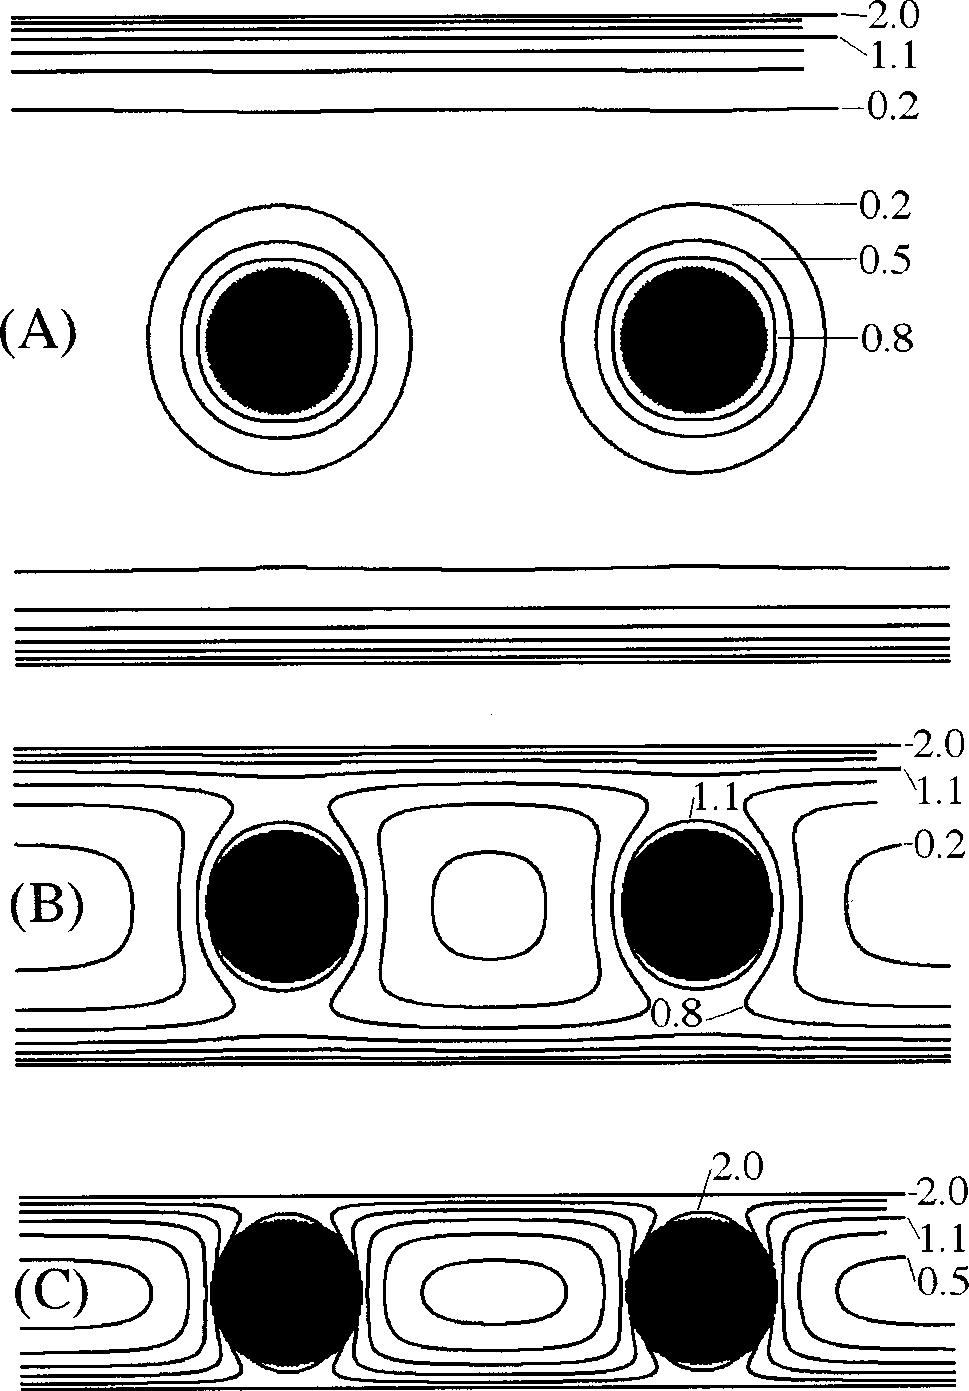 J. Chem. Phys., Vol. 109, No. 20, 22 November 1998 M. Ospeck and S. Fraden 9169 FIG. 5. Reduction of interparticle repulsion by increasing the confining potentials compared to Fig. 2. Plots of TFE vs circle circle separation ( r) for 0.